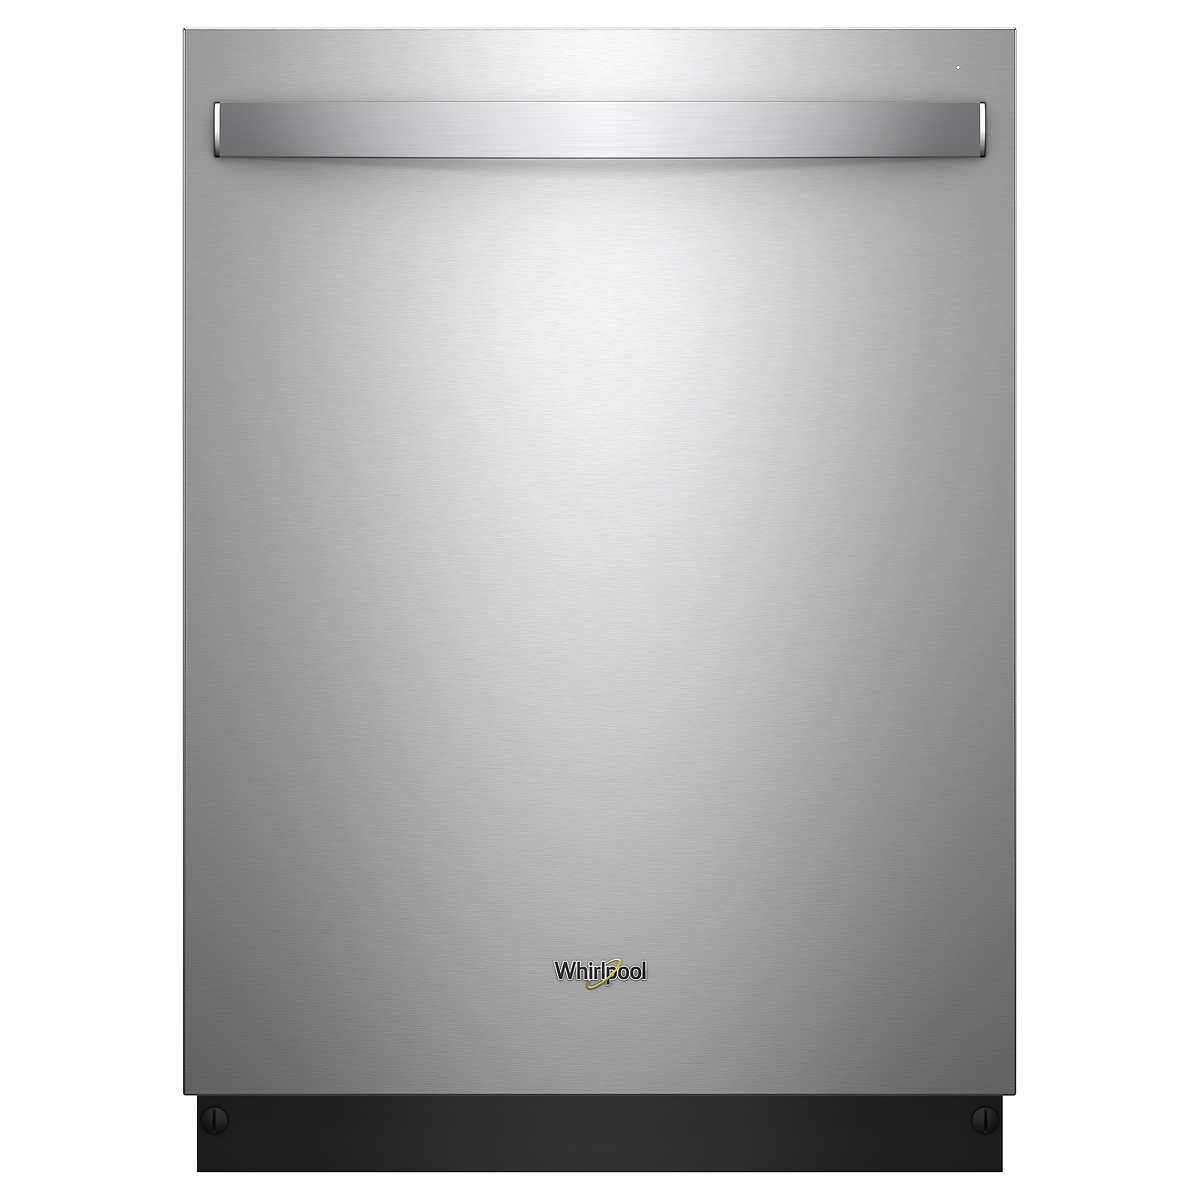 Costco Whirlpool Top Control Dishwasher Stainless Steel w/ Stainless Steel Tub, Total Coverage Spray Arm, & Third Level Rack Free Delivery, Setup, and Haul Away YMMV based on stock